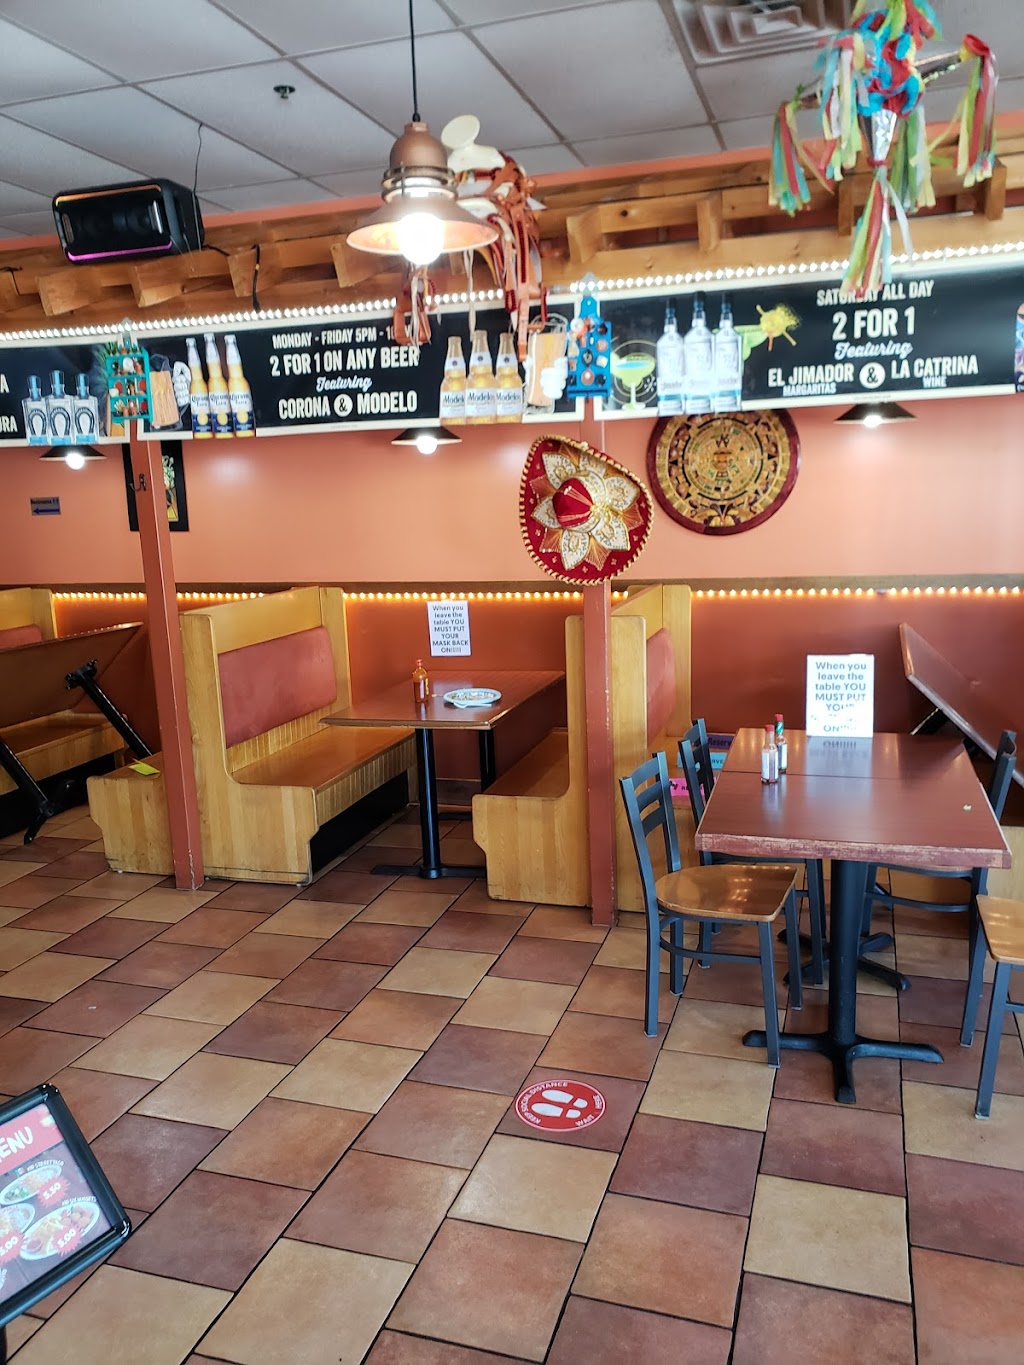 El Pariente Mexican Grill | 961 Wildwood Rd, St Paul, MN 55115, USA | Phone: (651) 748-5187